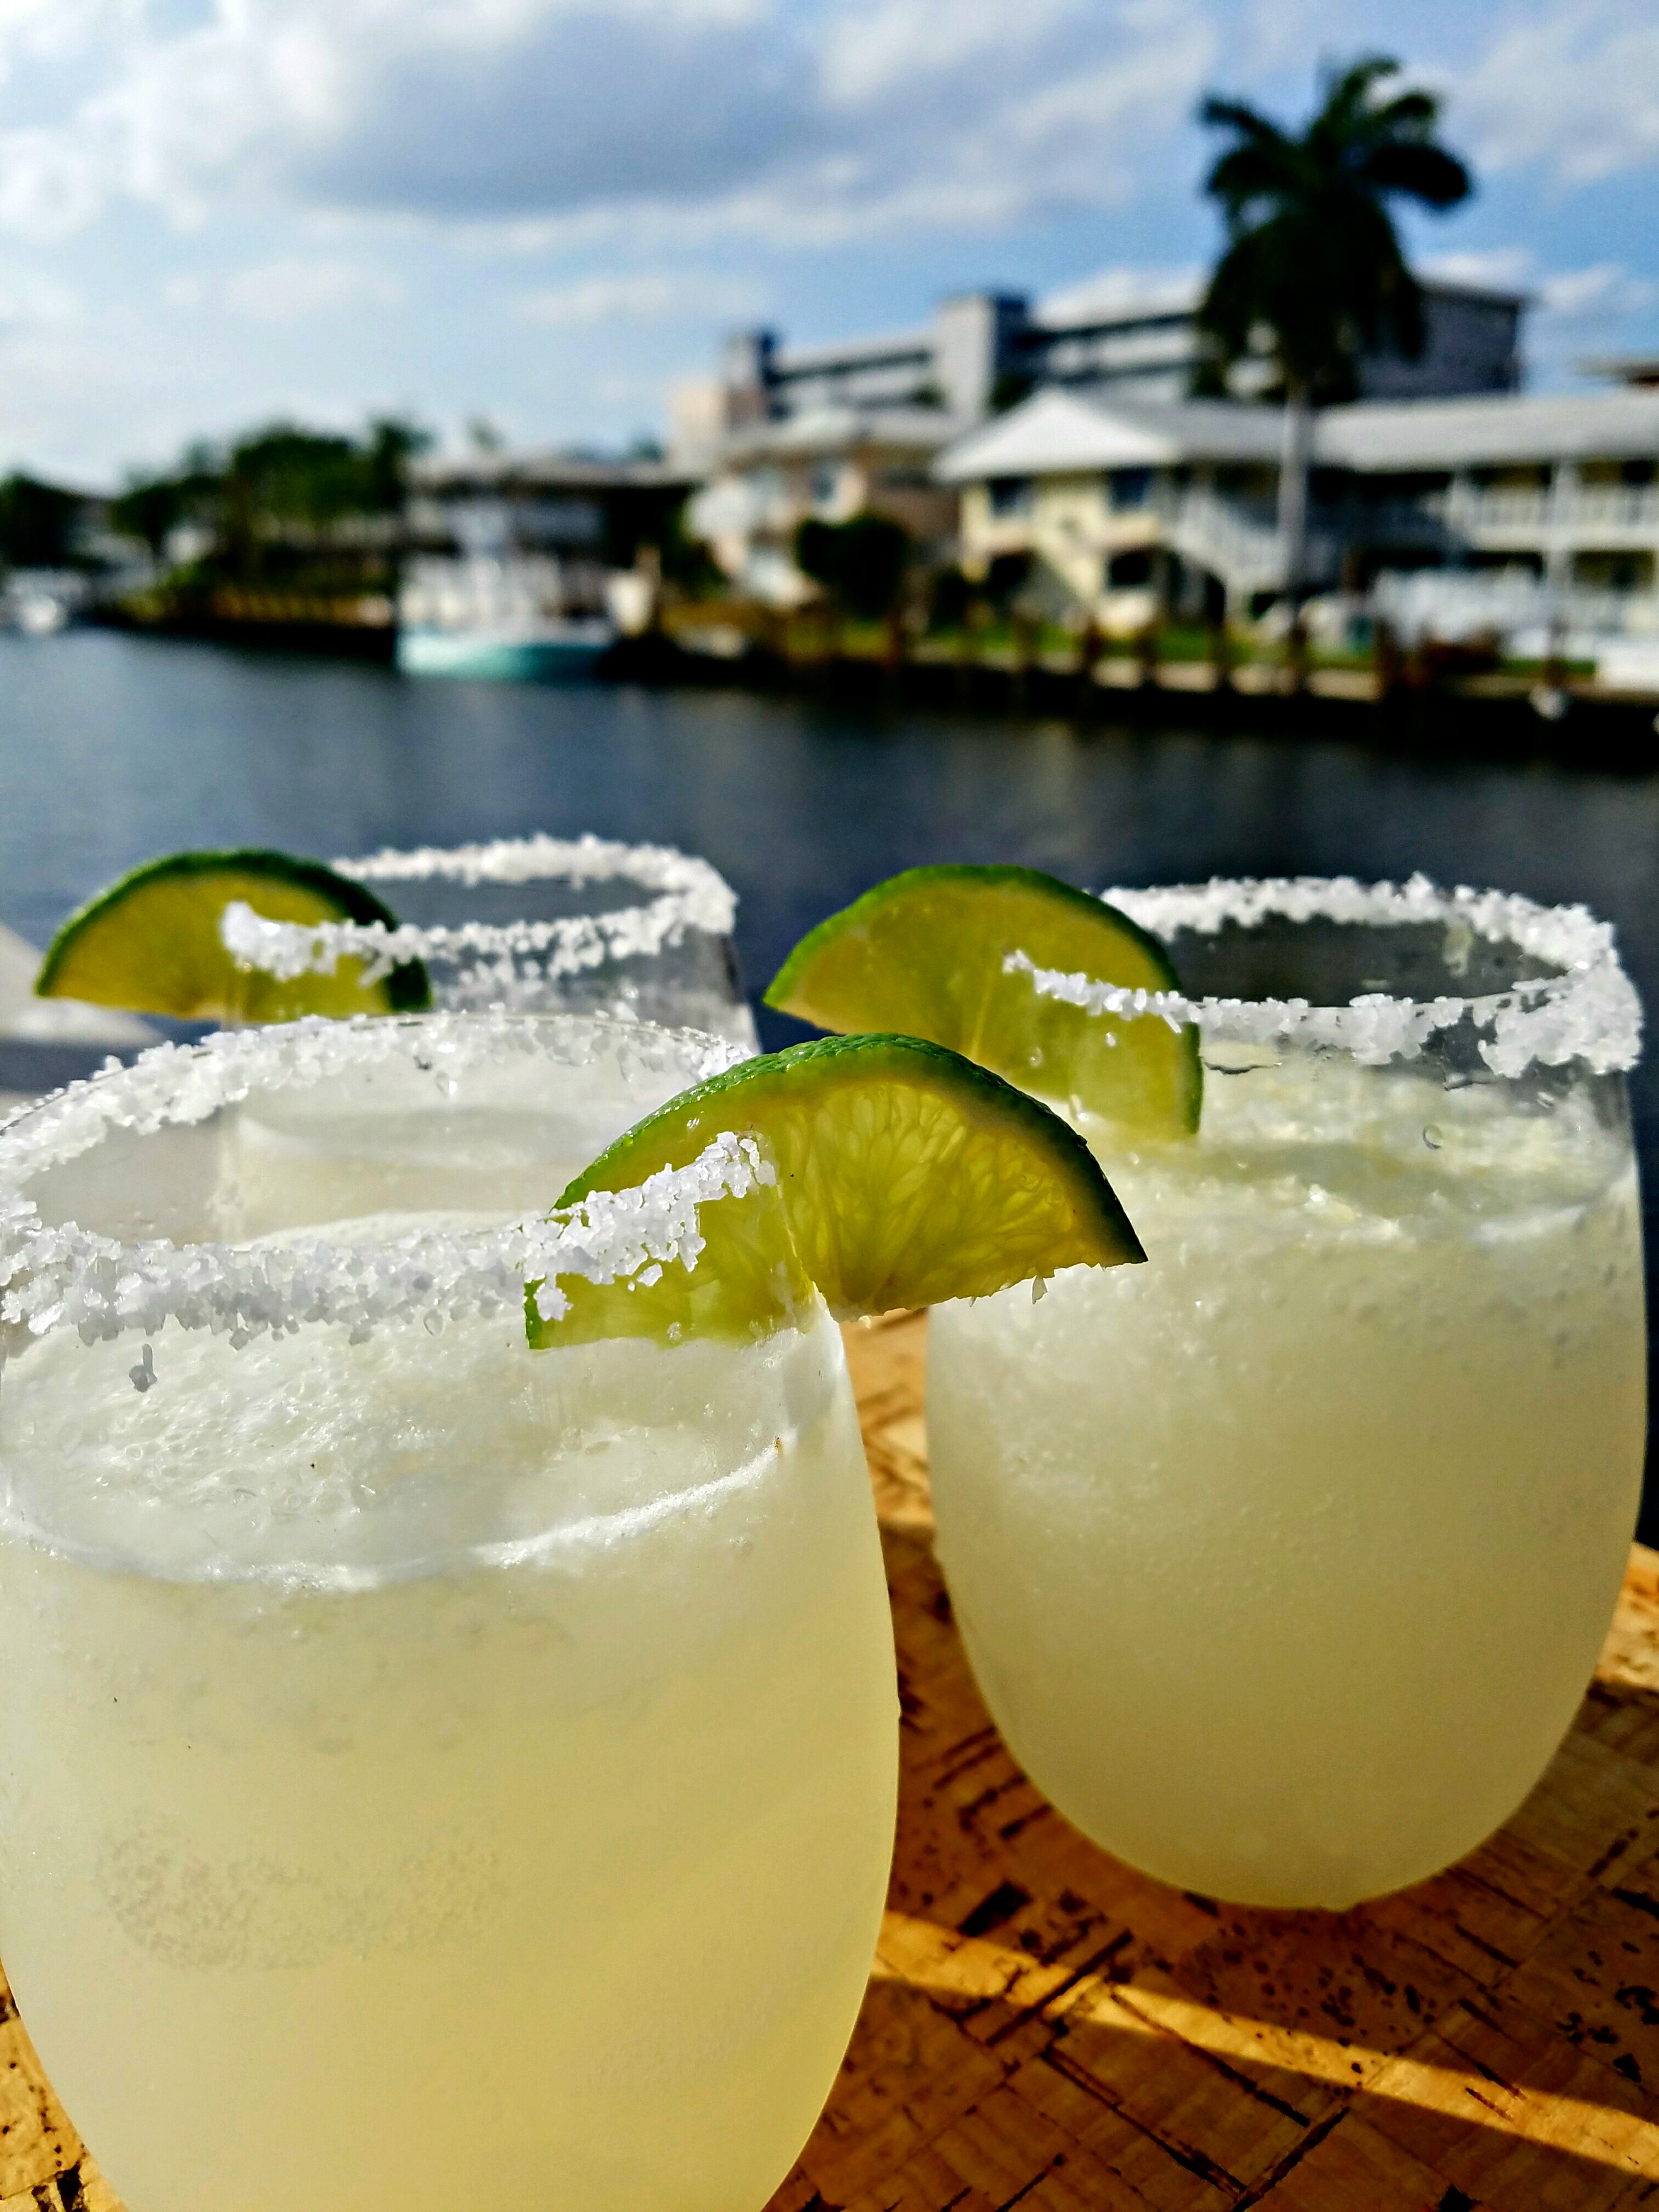 Norm's "Mucho Gusto" Margaritas...Thumbs UP...And "Ole'!" - Meemaw Eats